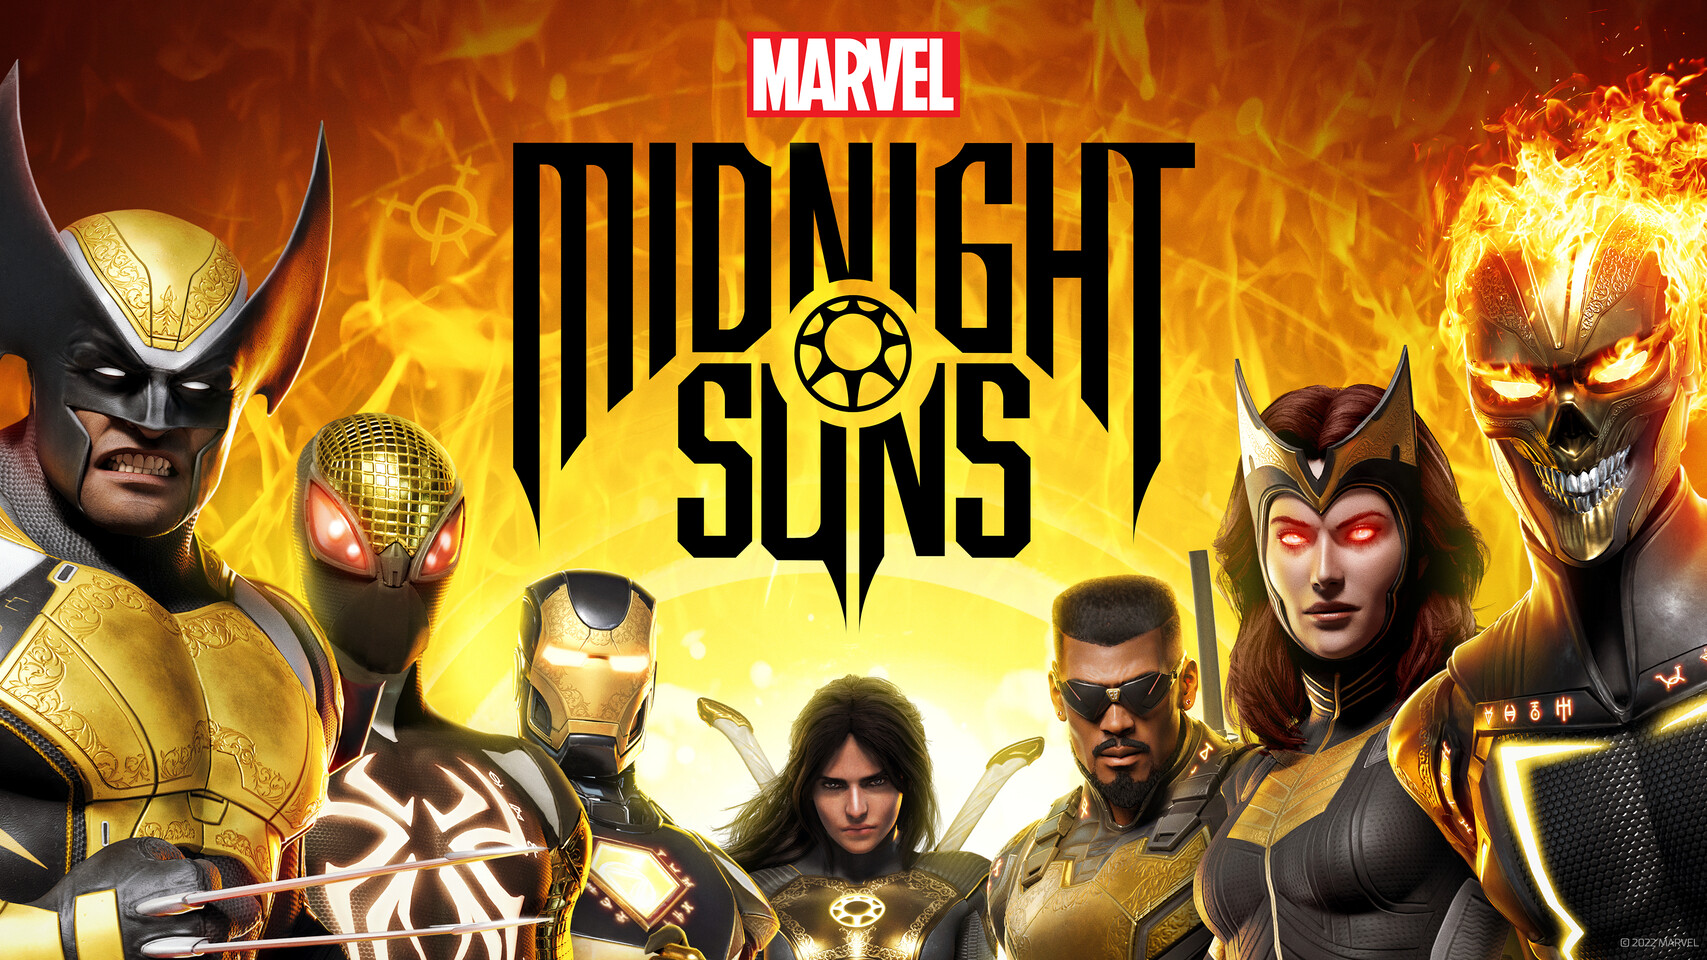 Midnight Suns Gameplay Trailer Confirms the Game's December Debut